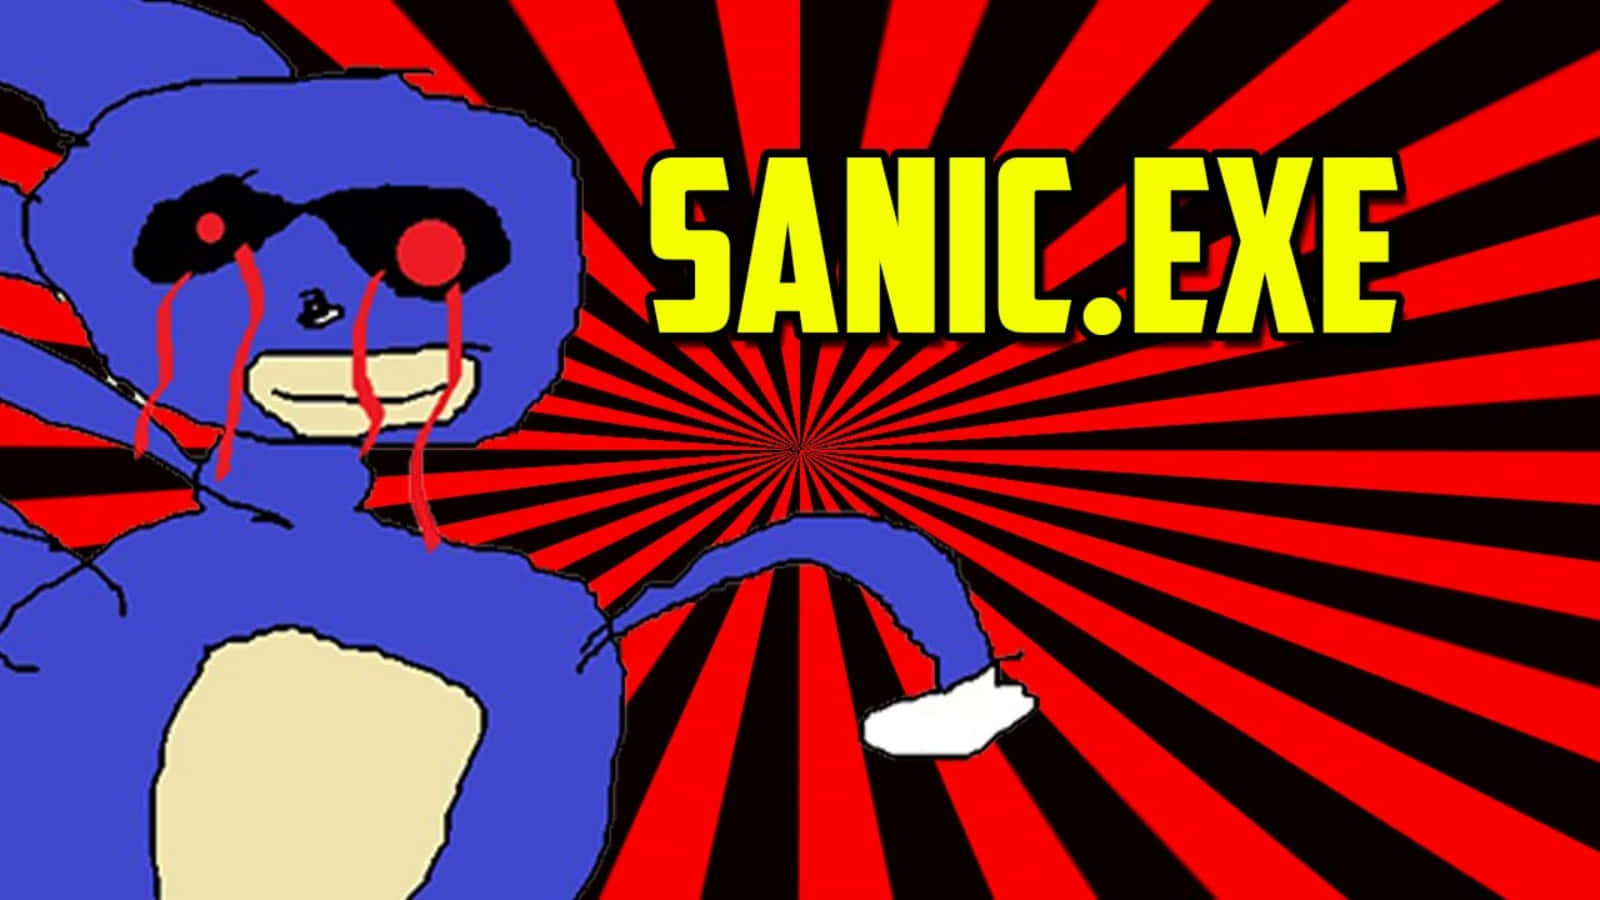 The Blue Blur, Iconic Video Game Character, Sanic